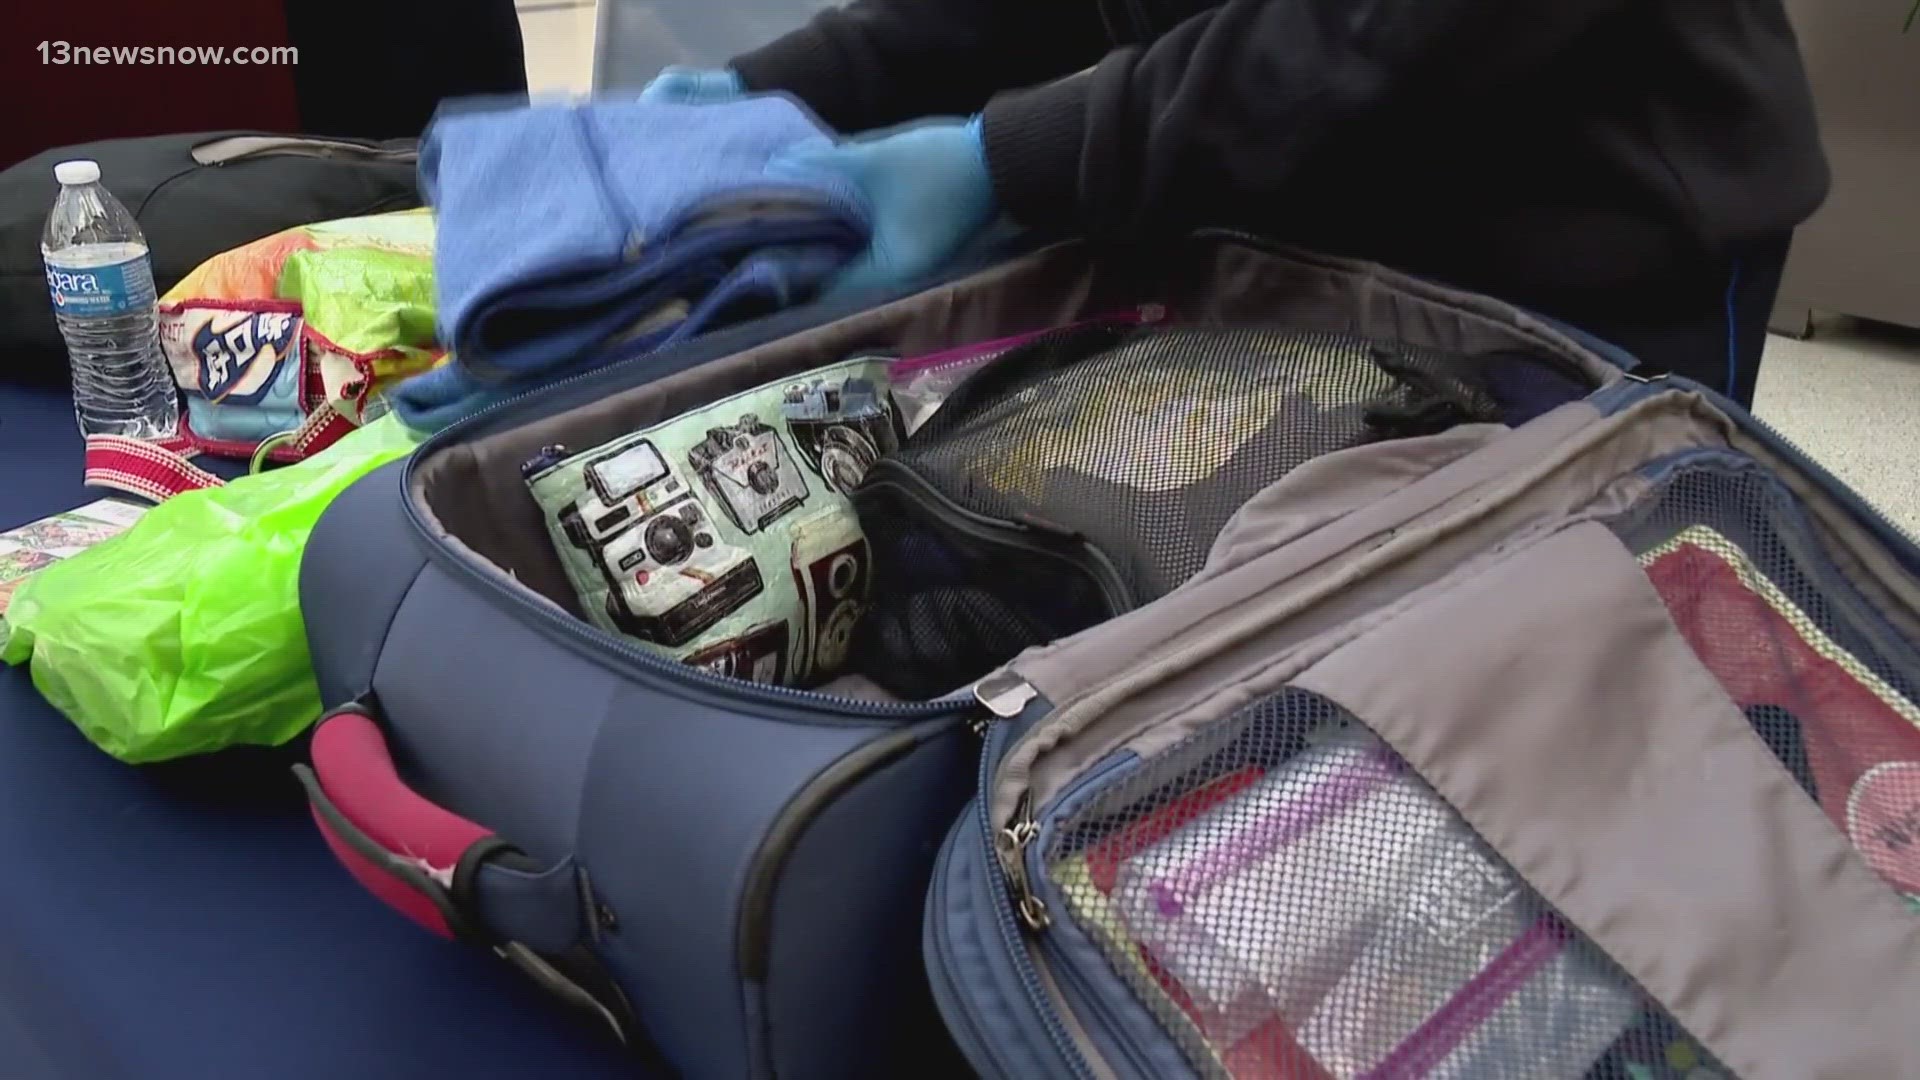 Planning ahead and packing properly is essential to keeping the security screening process moving, the TSA said in a news release.